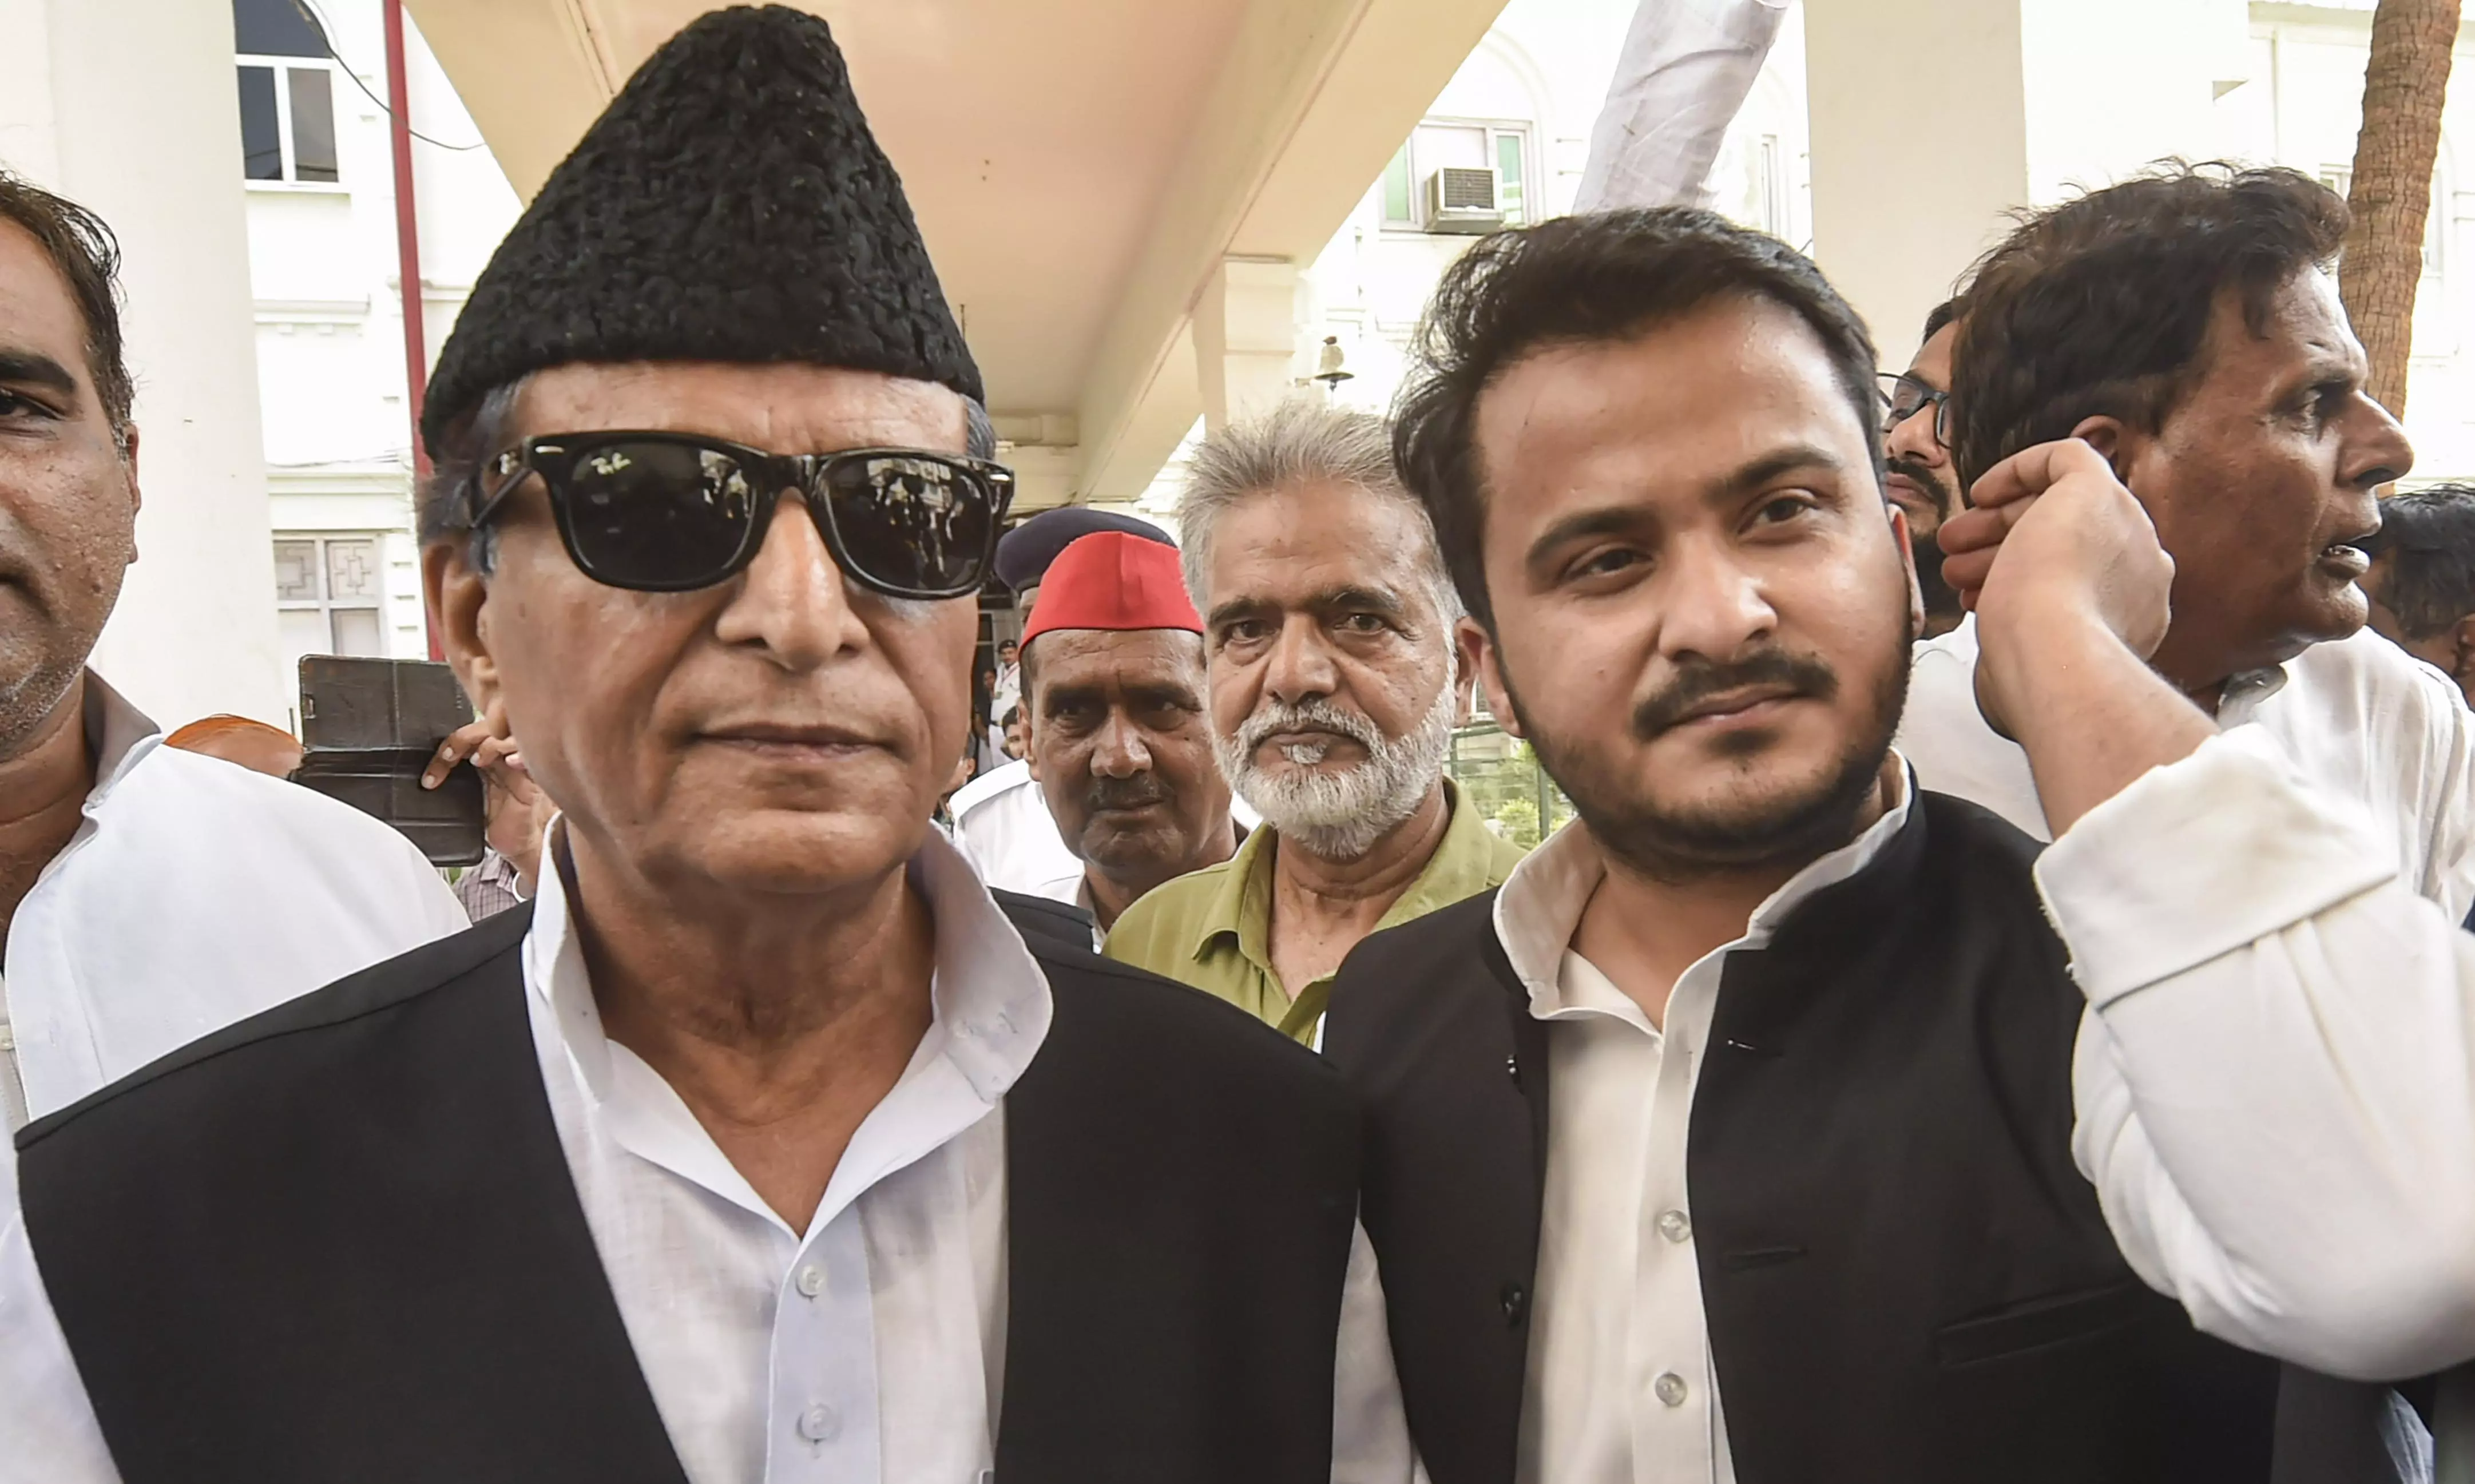 SP leader Azam Khan fears encounter as UP police shift him, son to different jails